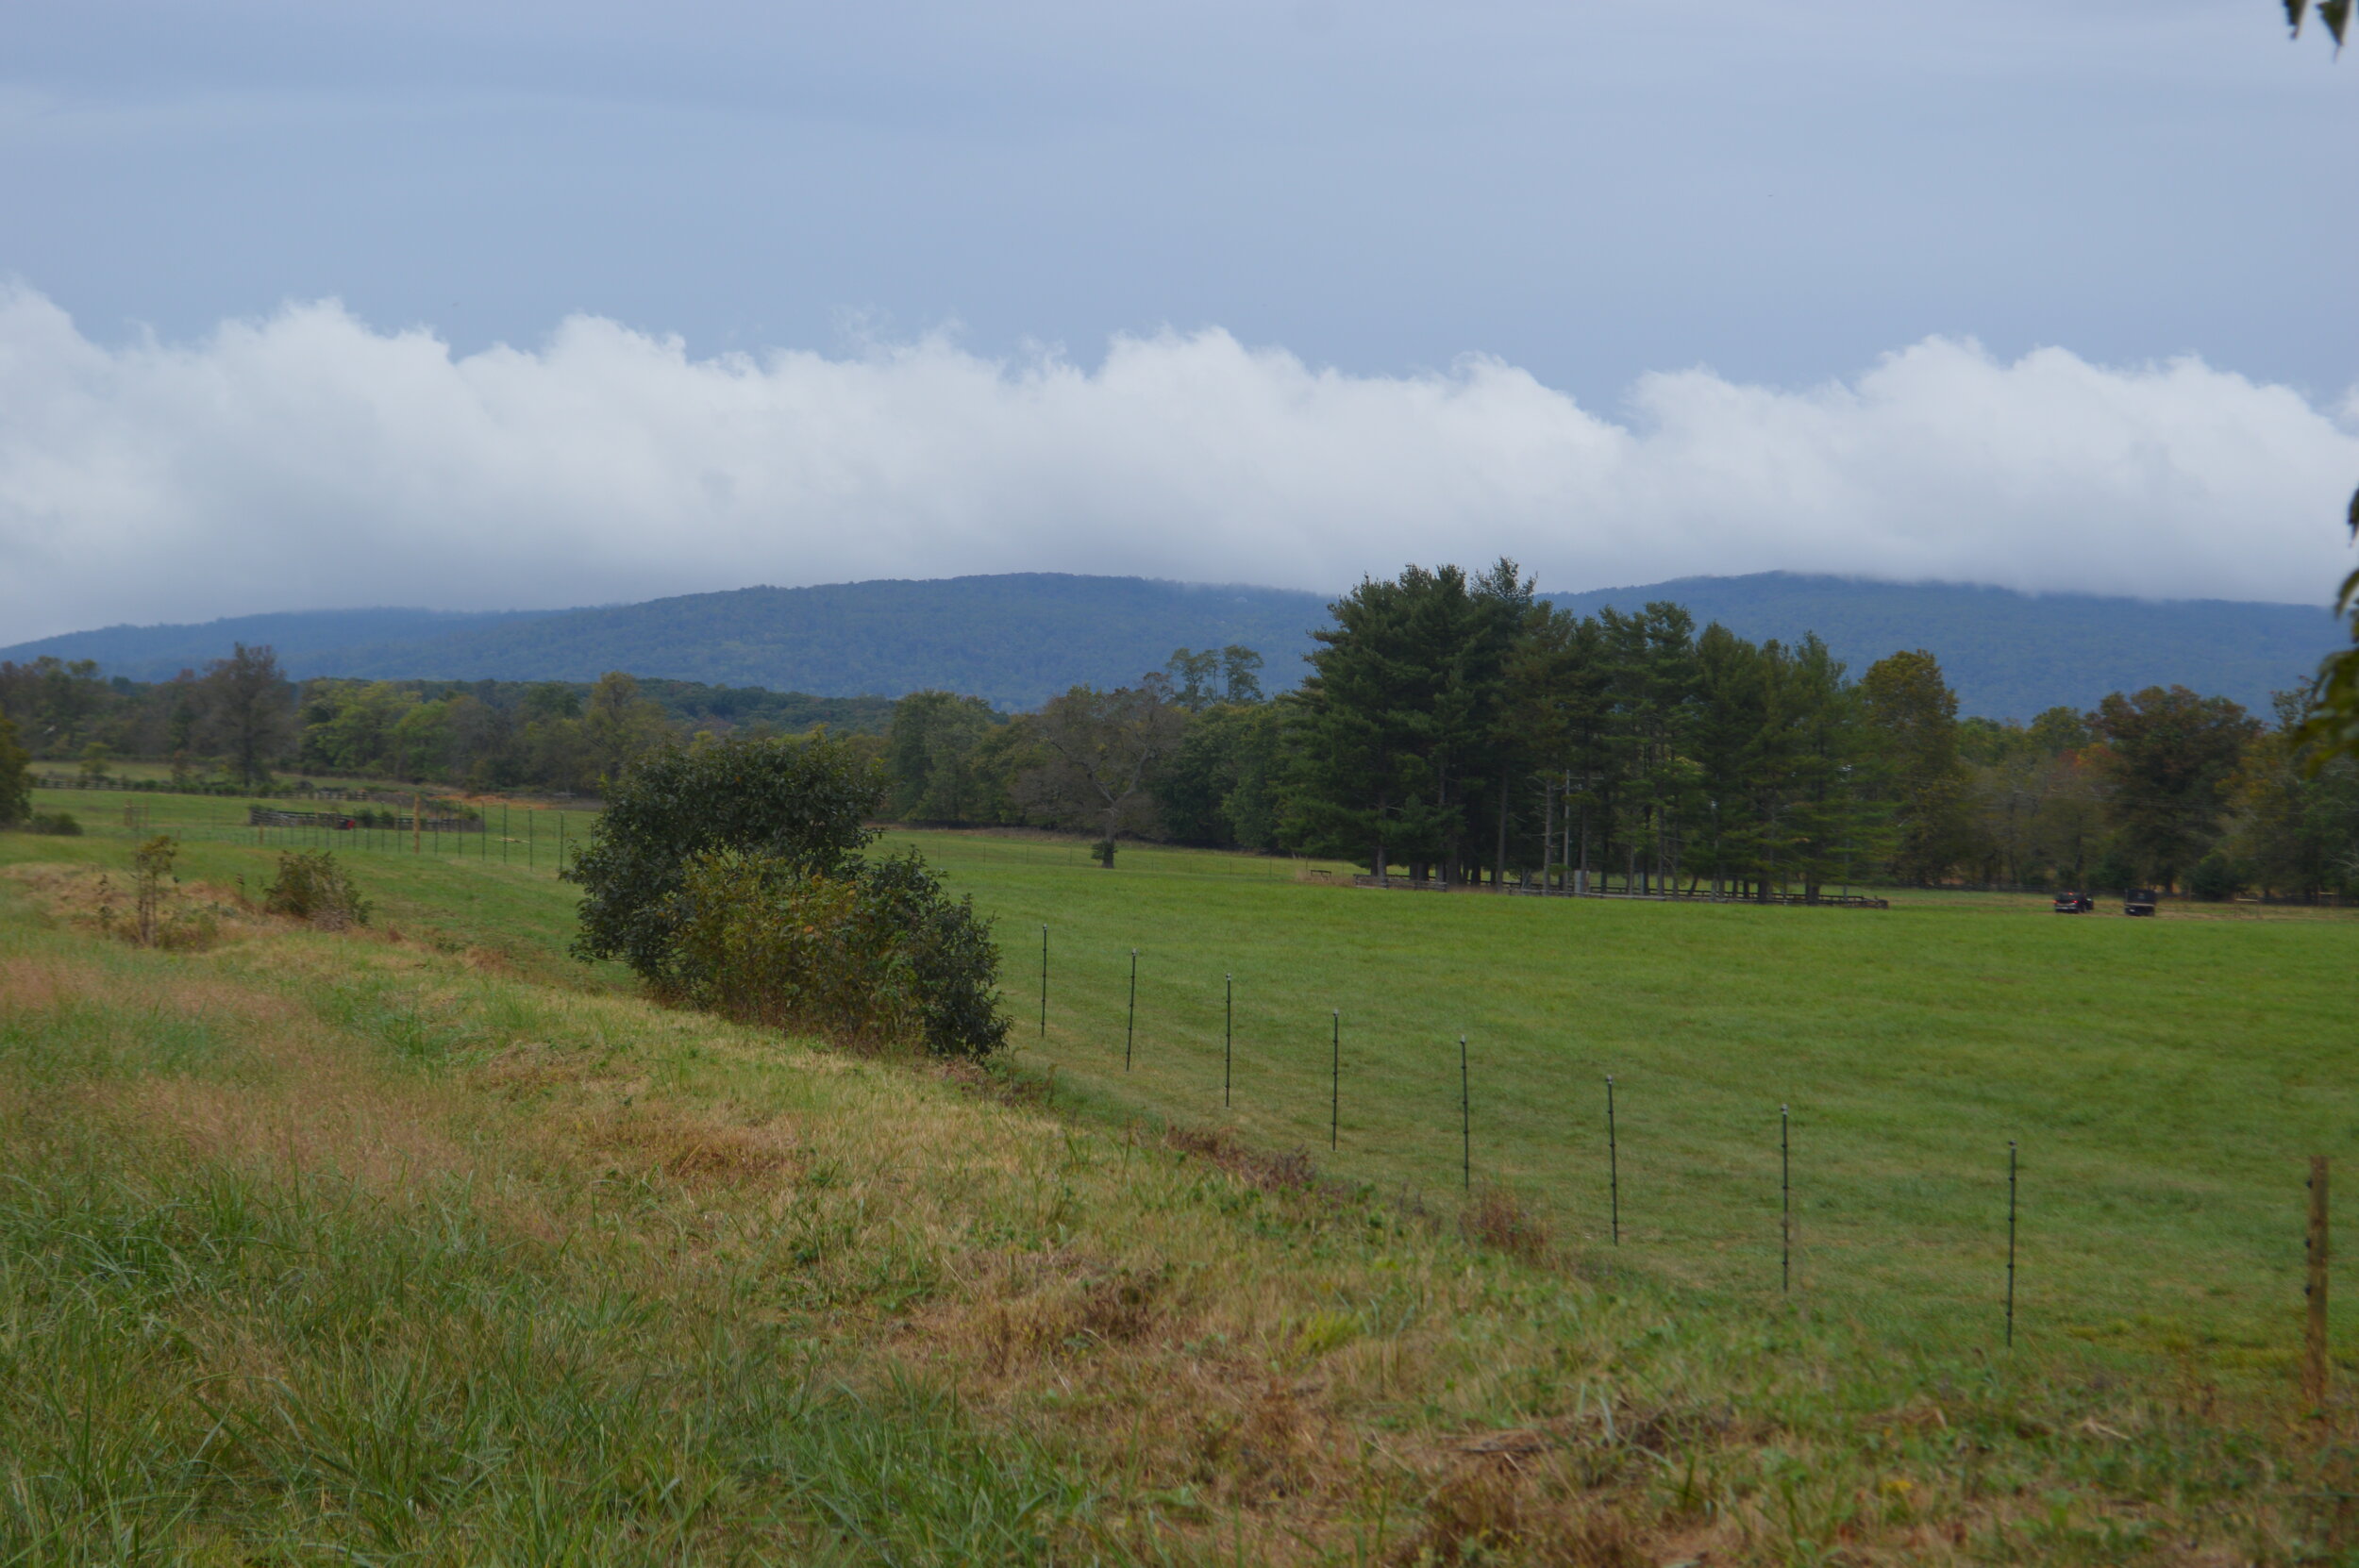  A newly-installed deer fence runs along nearly 44 acres of pasture north of the airstrip. 